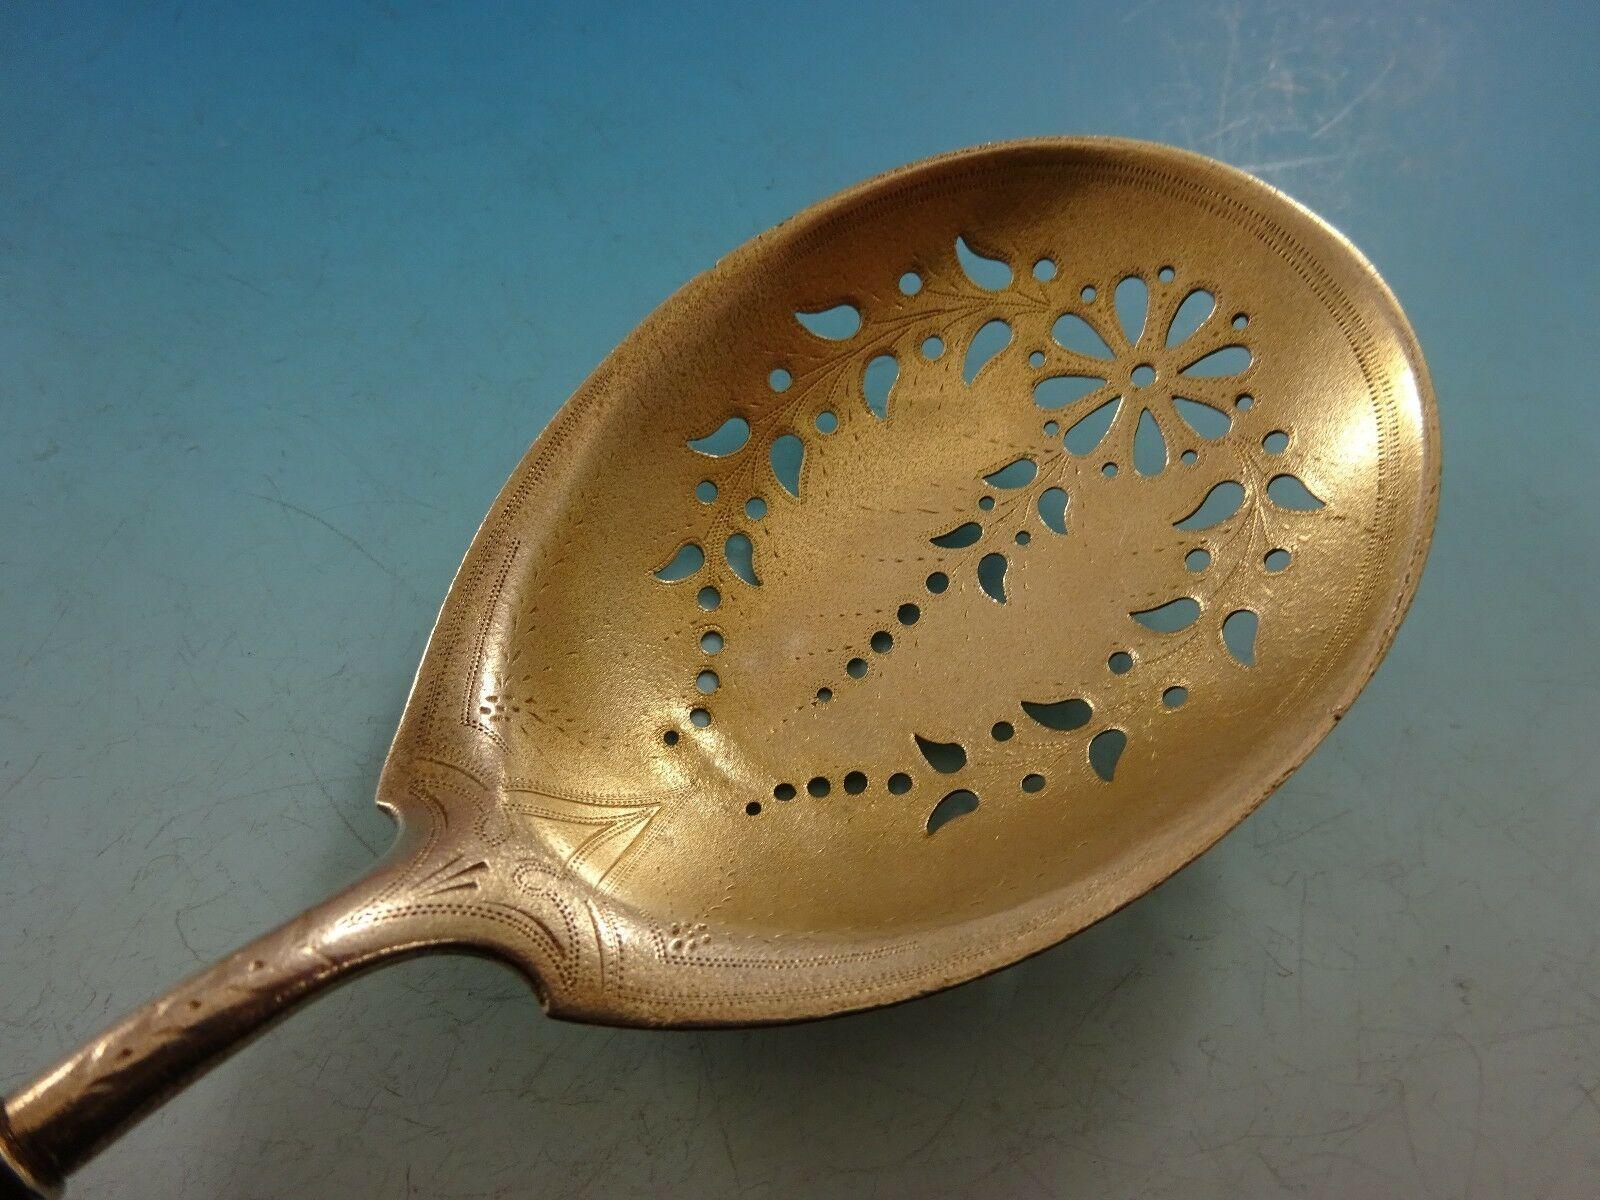 Ball end pattern #2 by Wendt

Sterling silver ice spoon, pierced, brite-cut, and gold washed 10